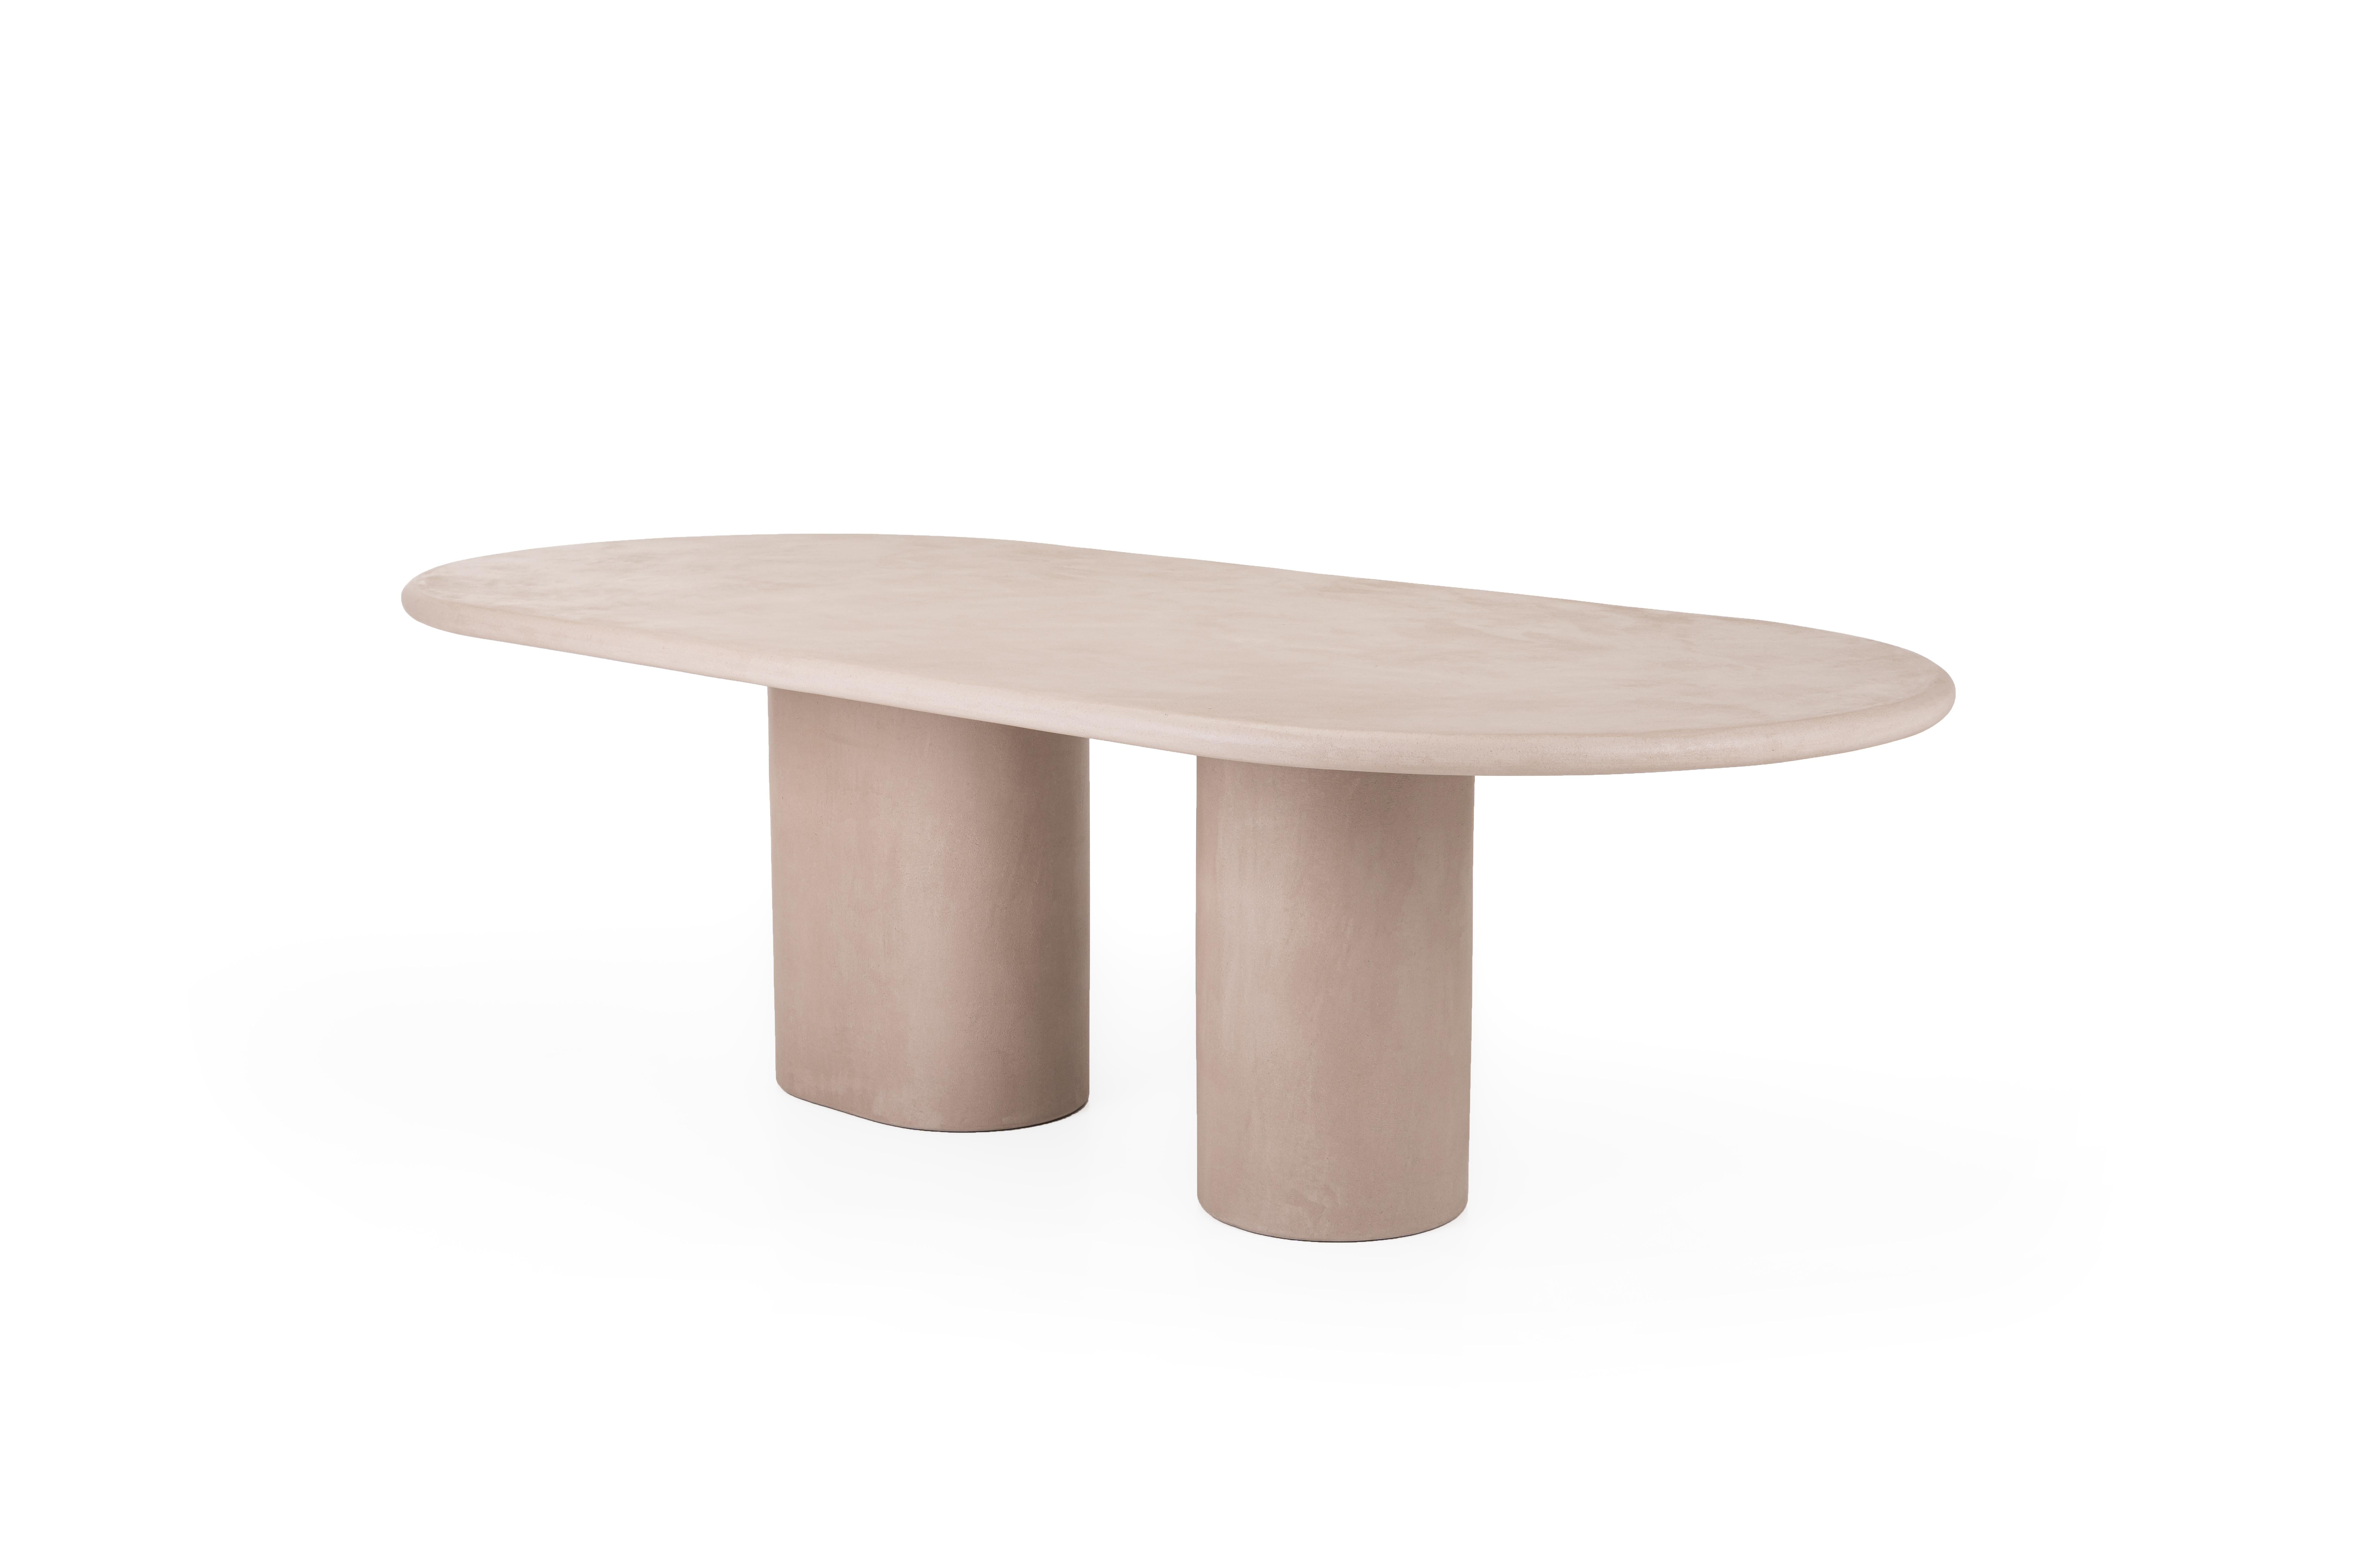 Mortex Dining Table "Column" 280 by Isabelle Beaumont